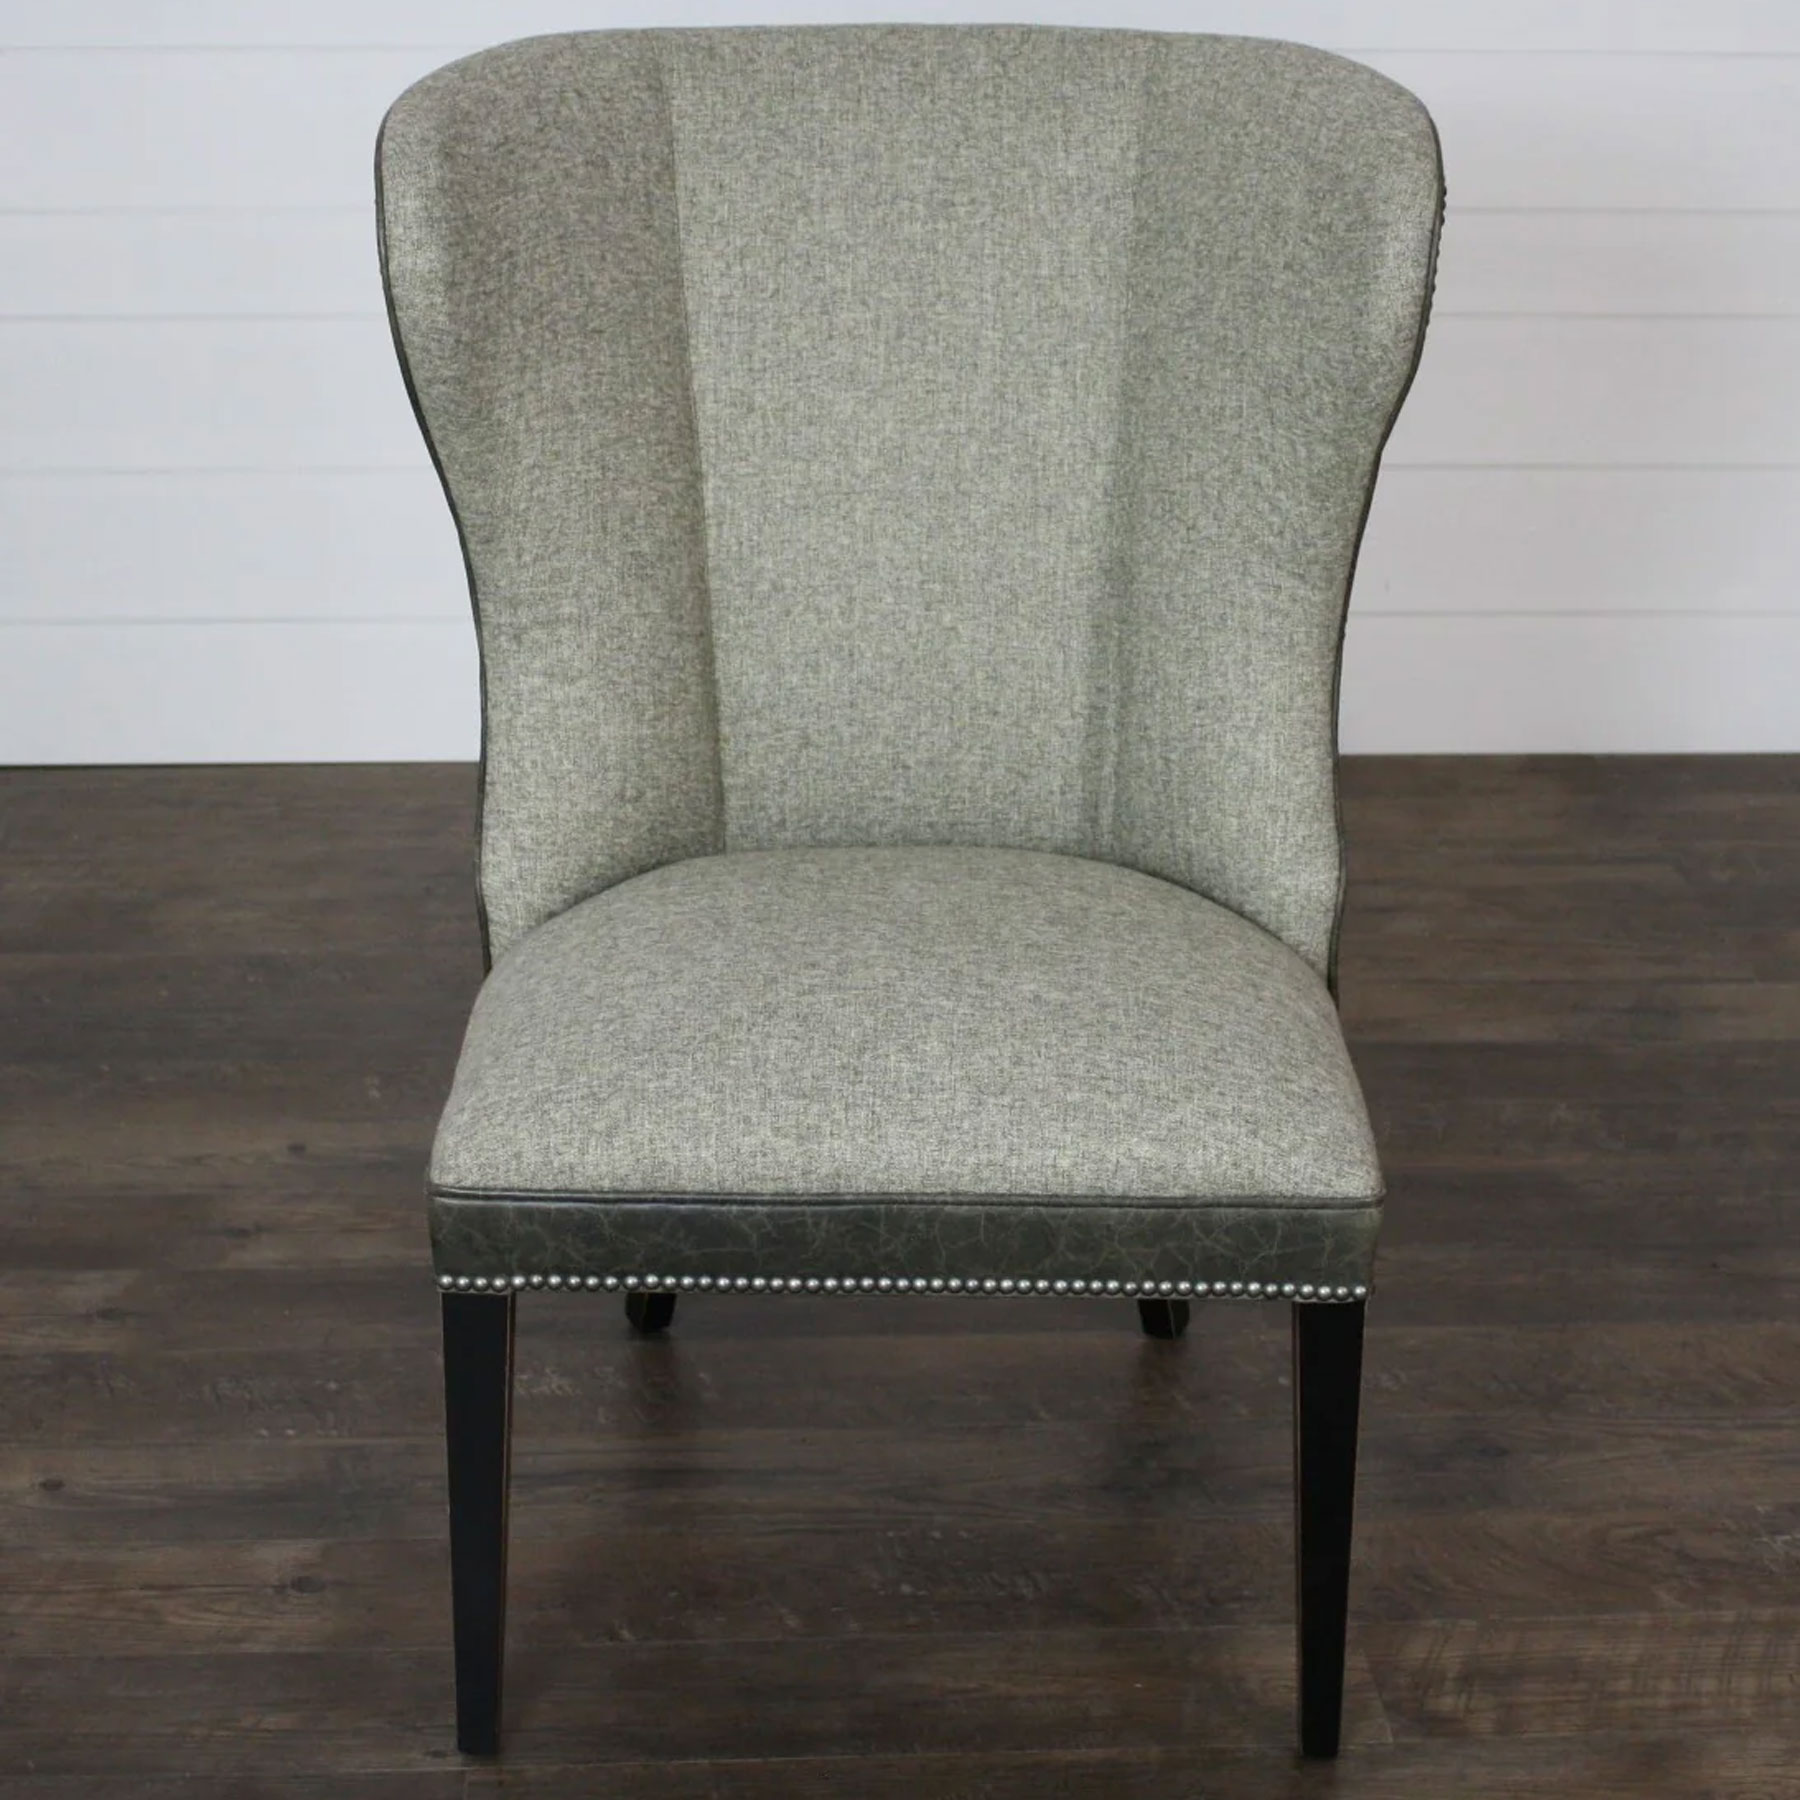 Leathercraft 472 Wellington Dining Chair in Whitman Fabric and San Antonio Fretwork Leather